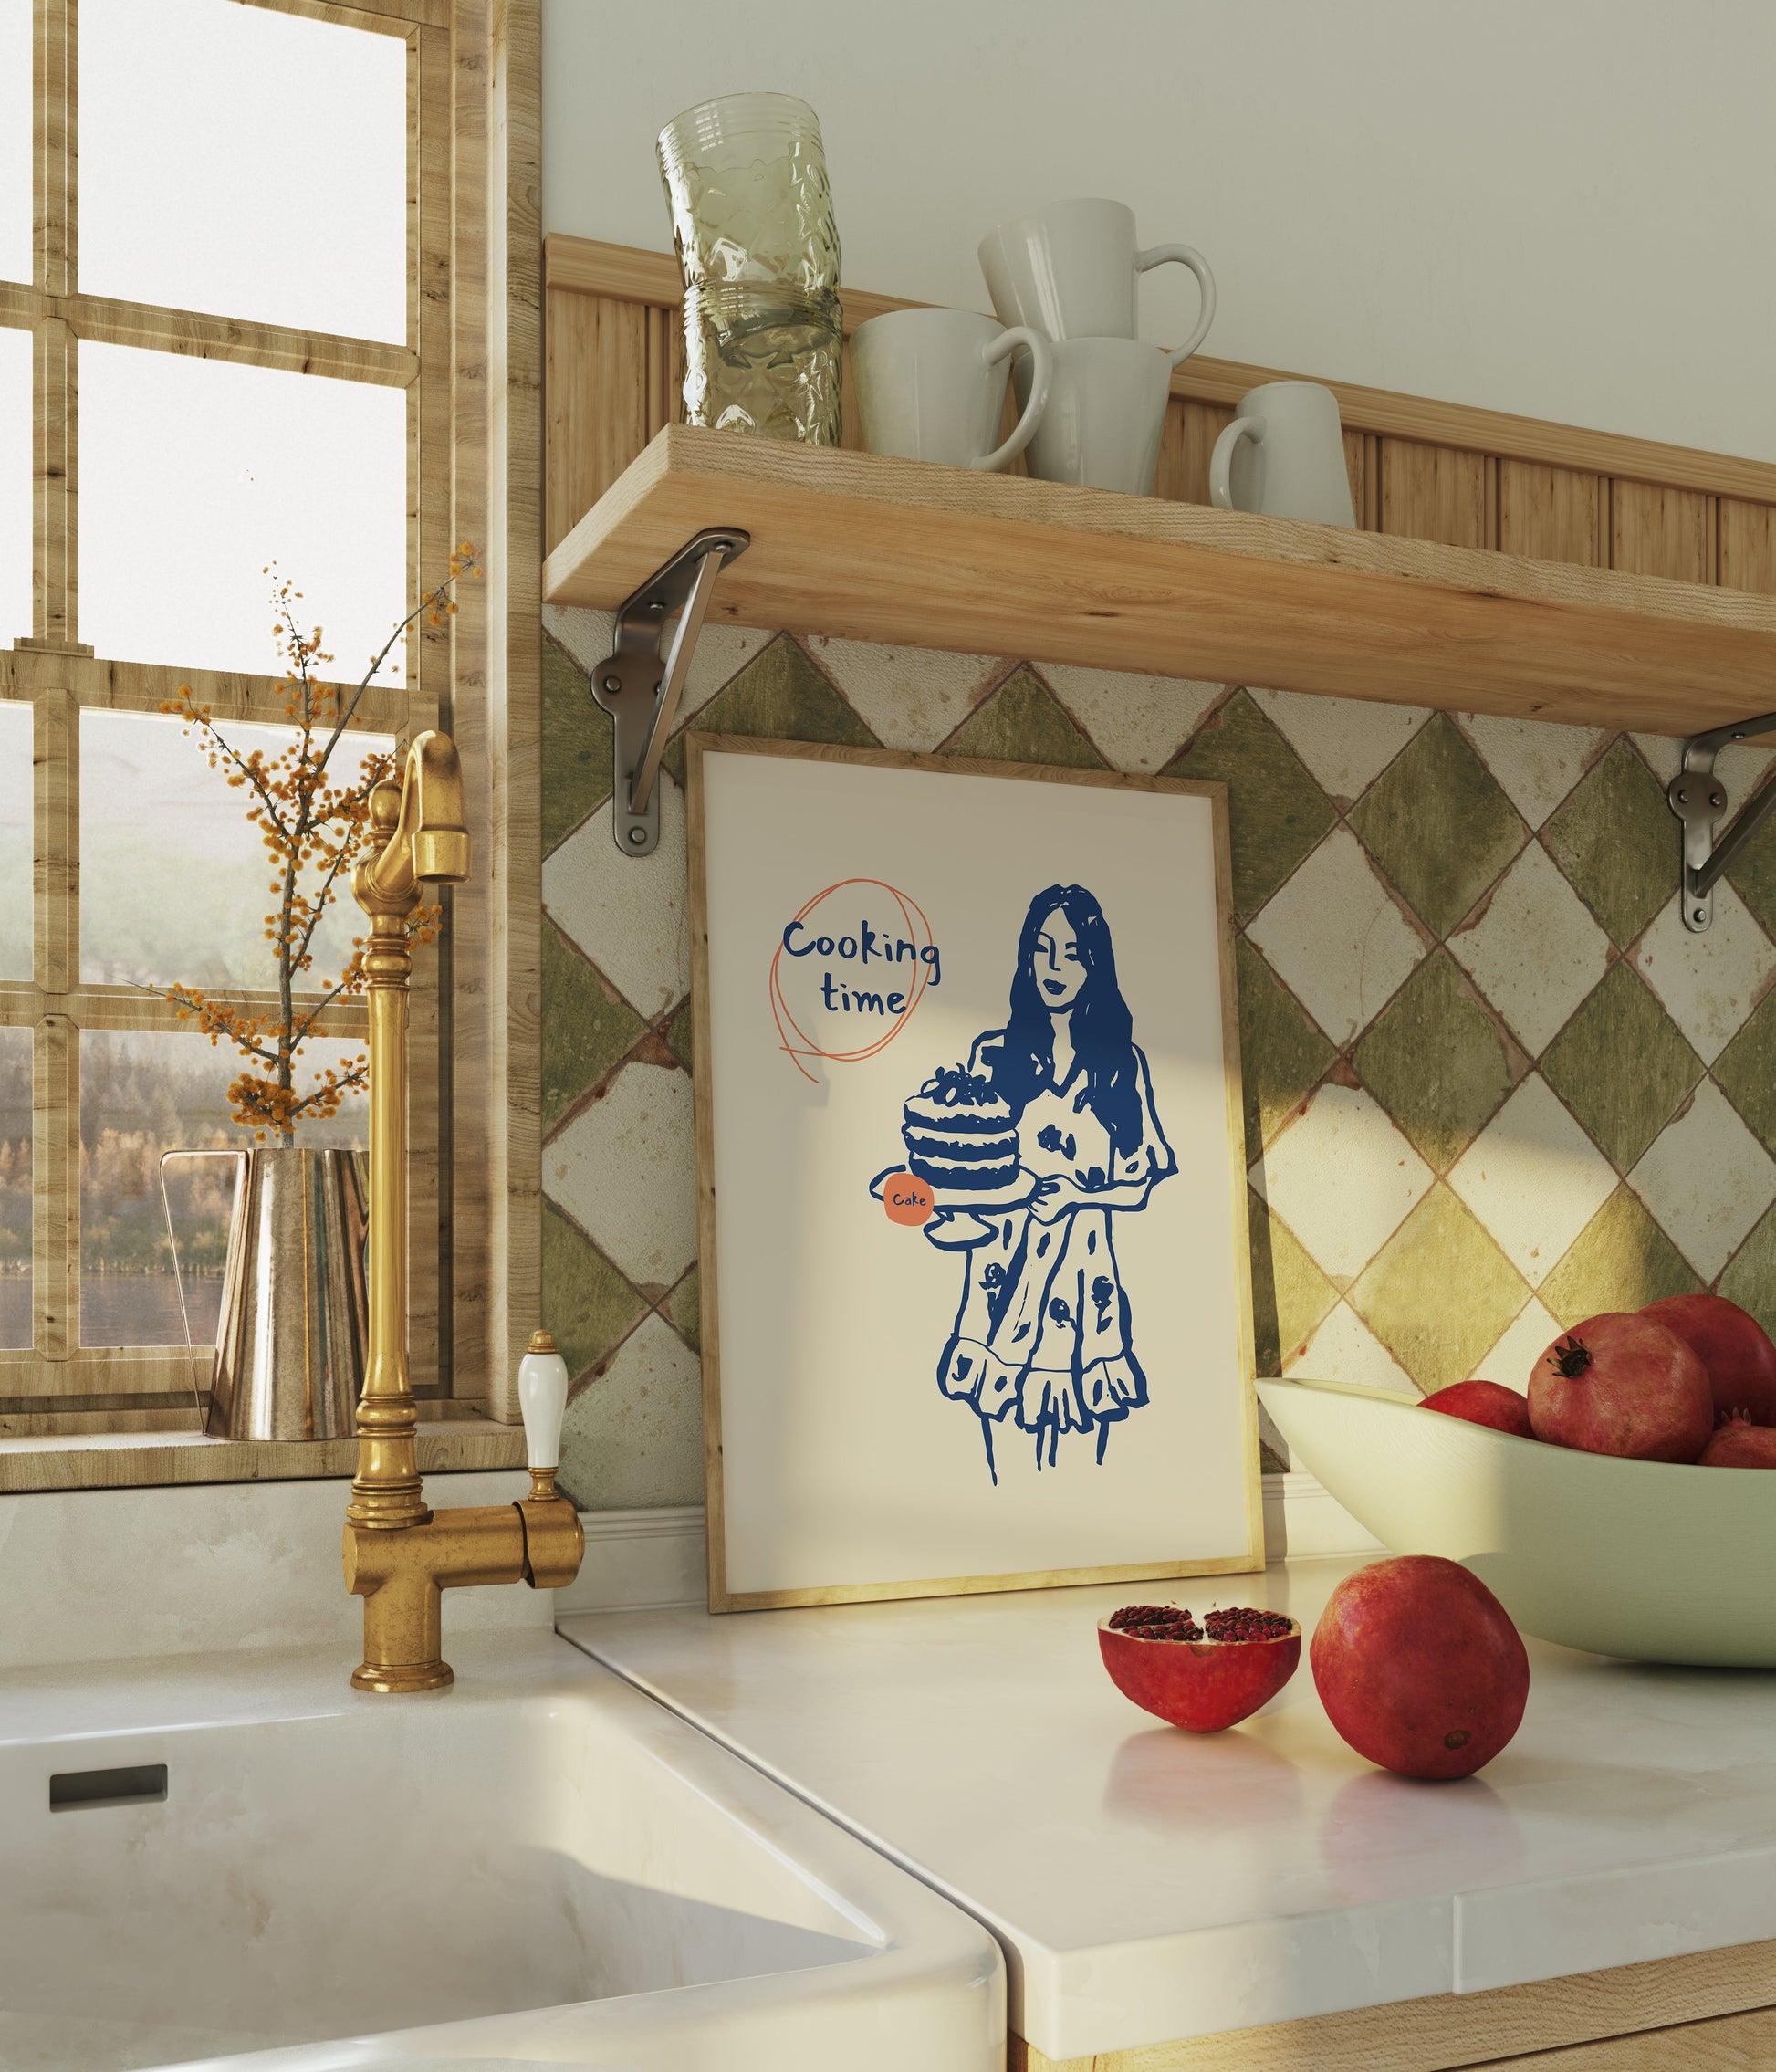 a picture of a woman holding a plate of apples on a kitchen counter